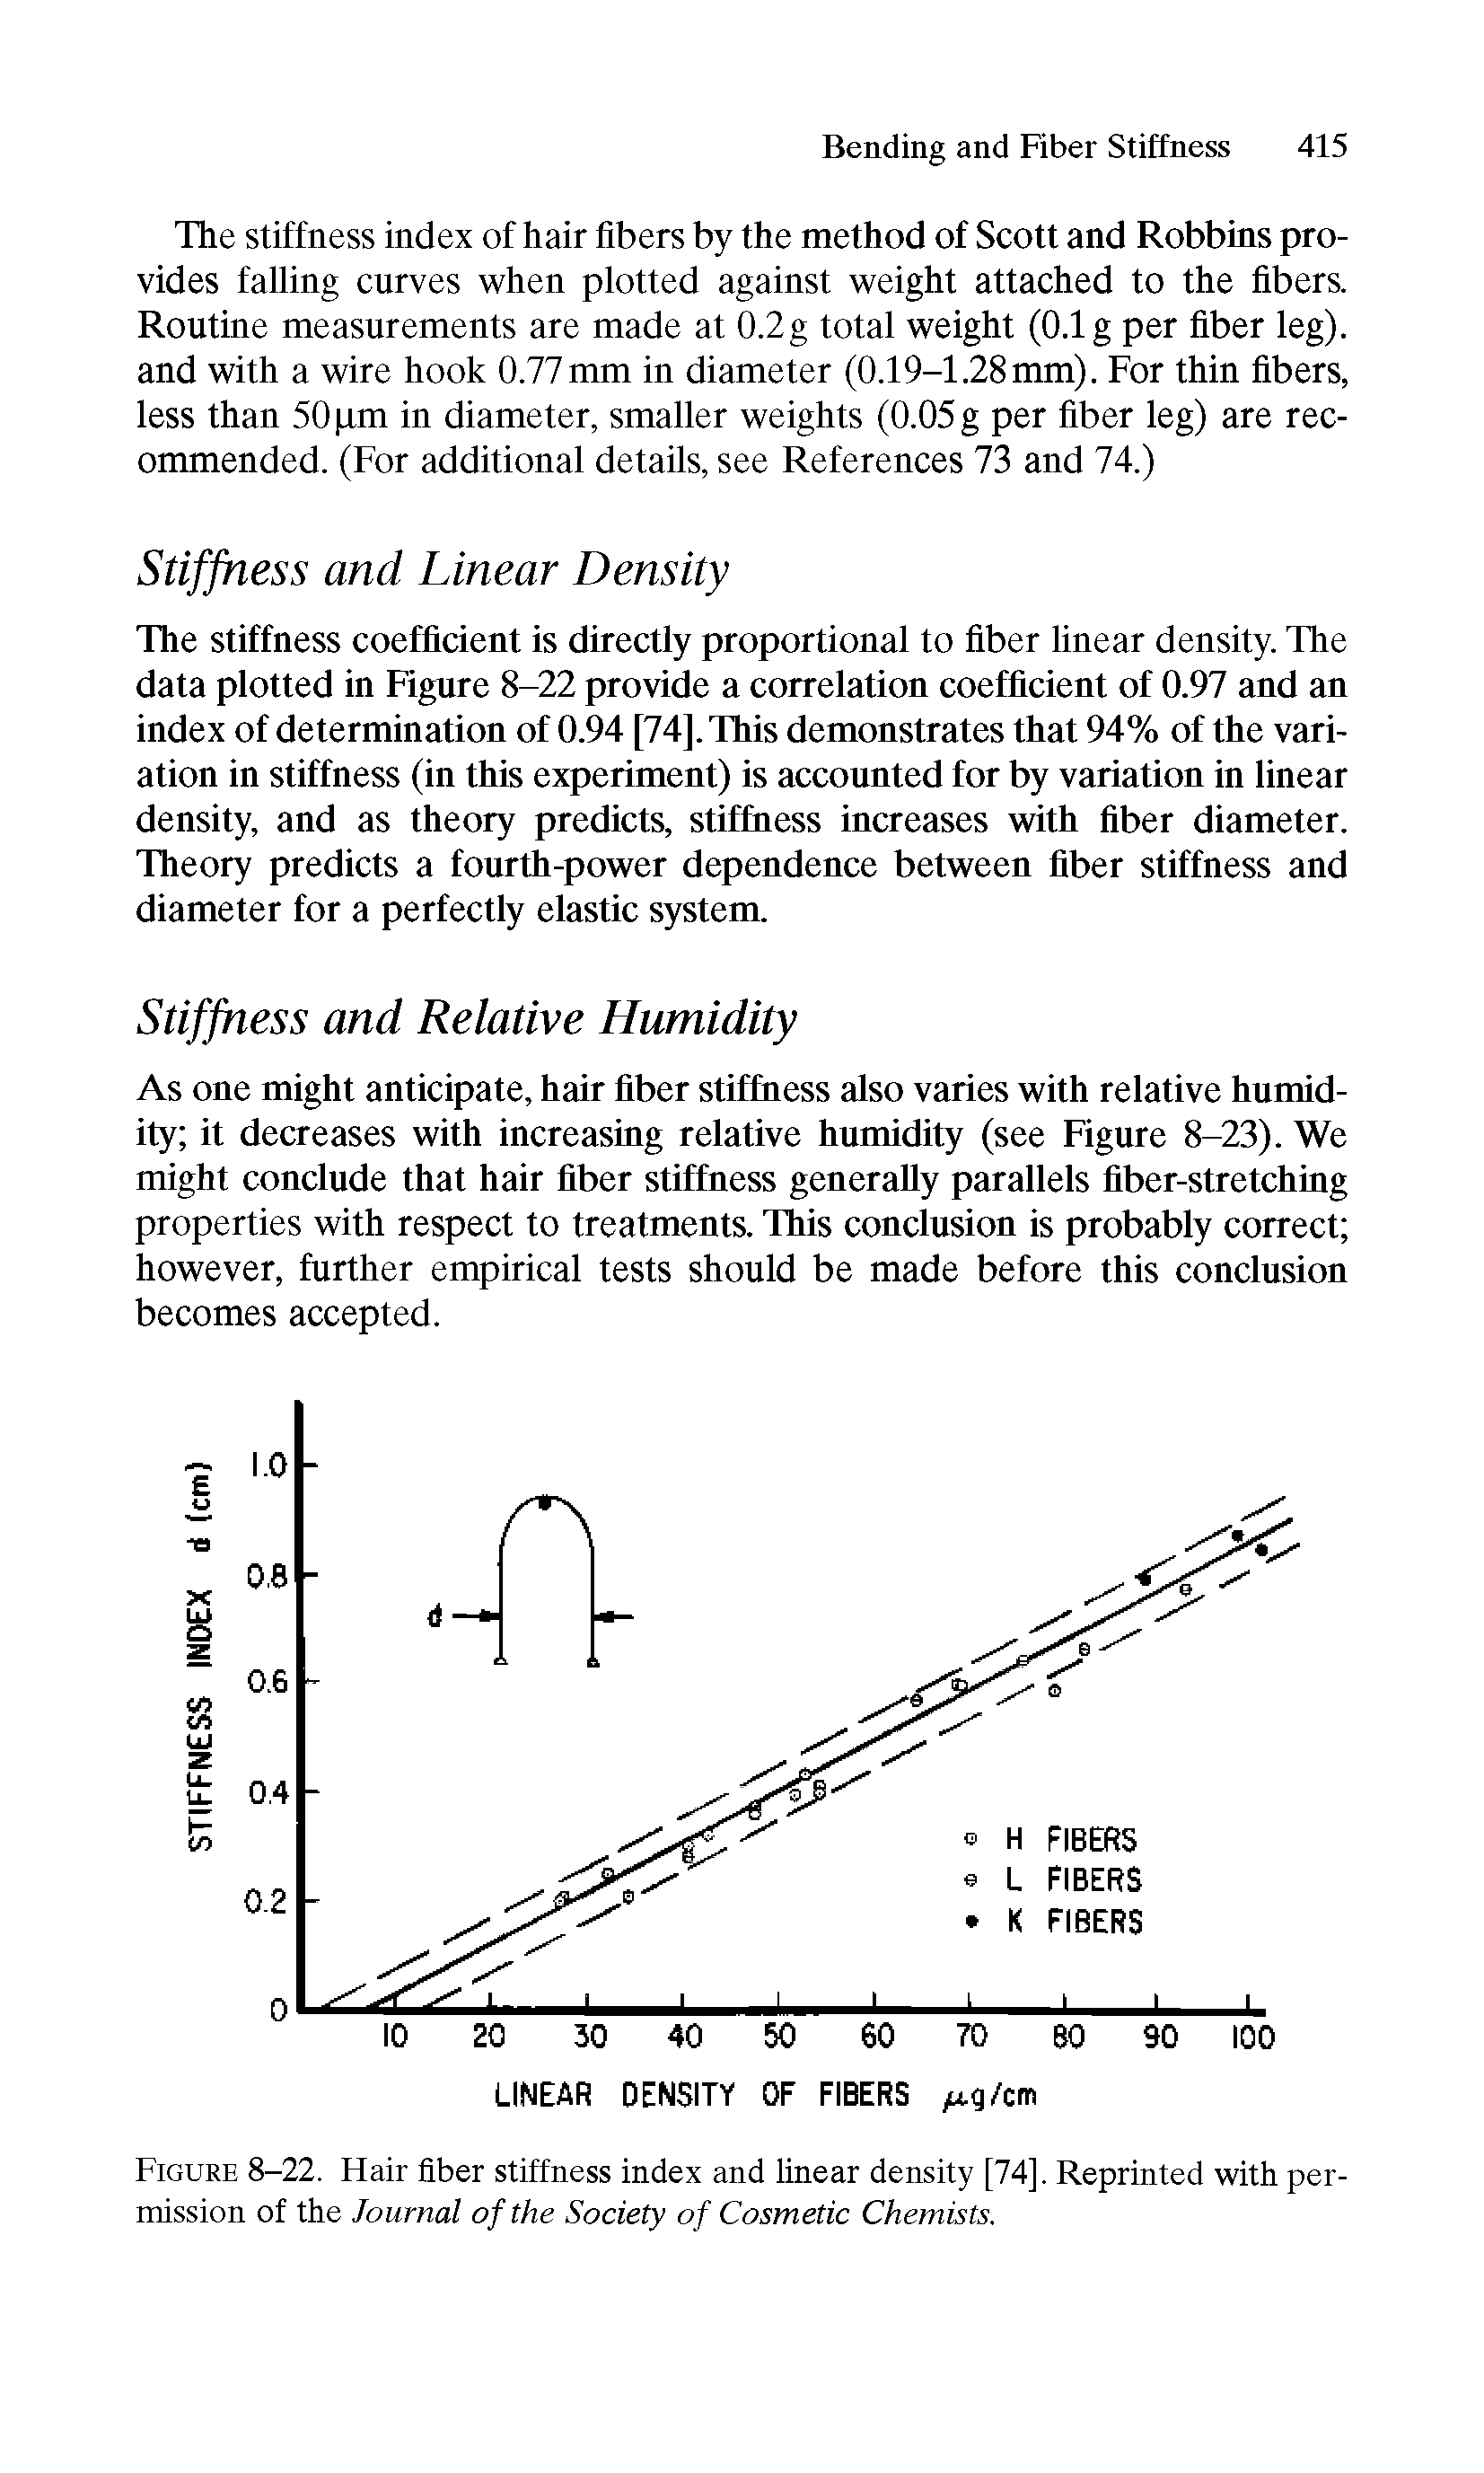 Figure 8-22. Hair fiber stiffness index and linear density [74]. Reprinted with permission of the Journal of the Society of Cosmetic Chemists.